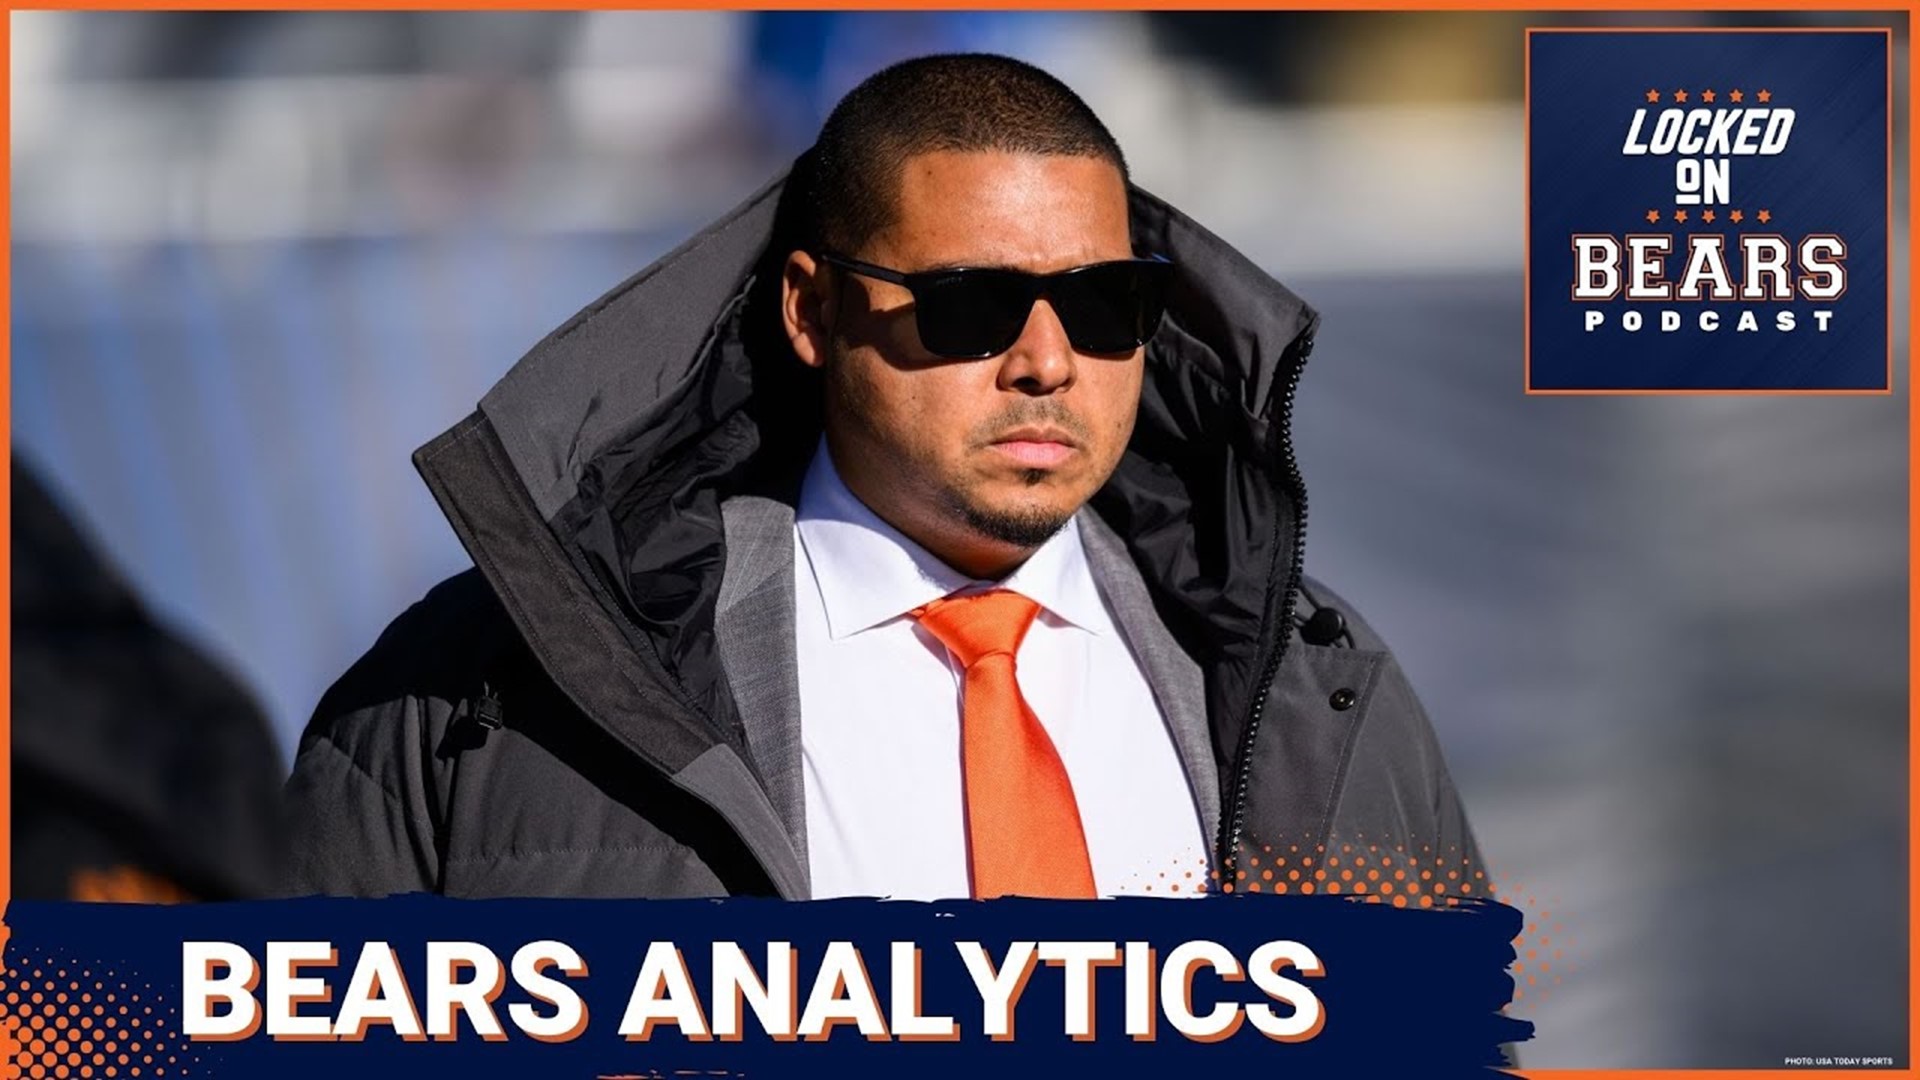 The Chicago Bears' analytics department identified "critical factors" for players at every position